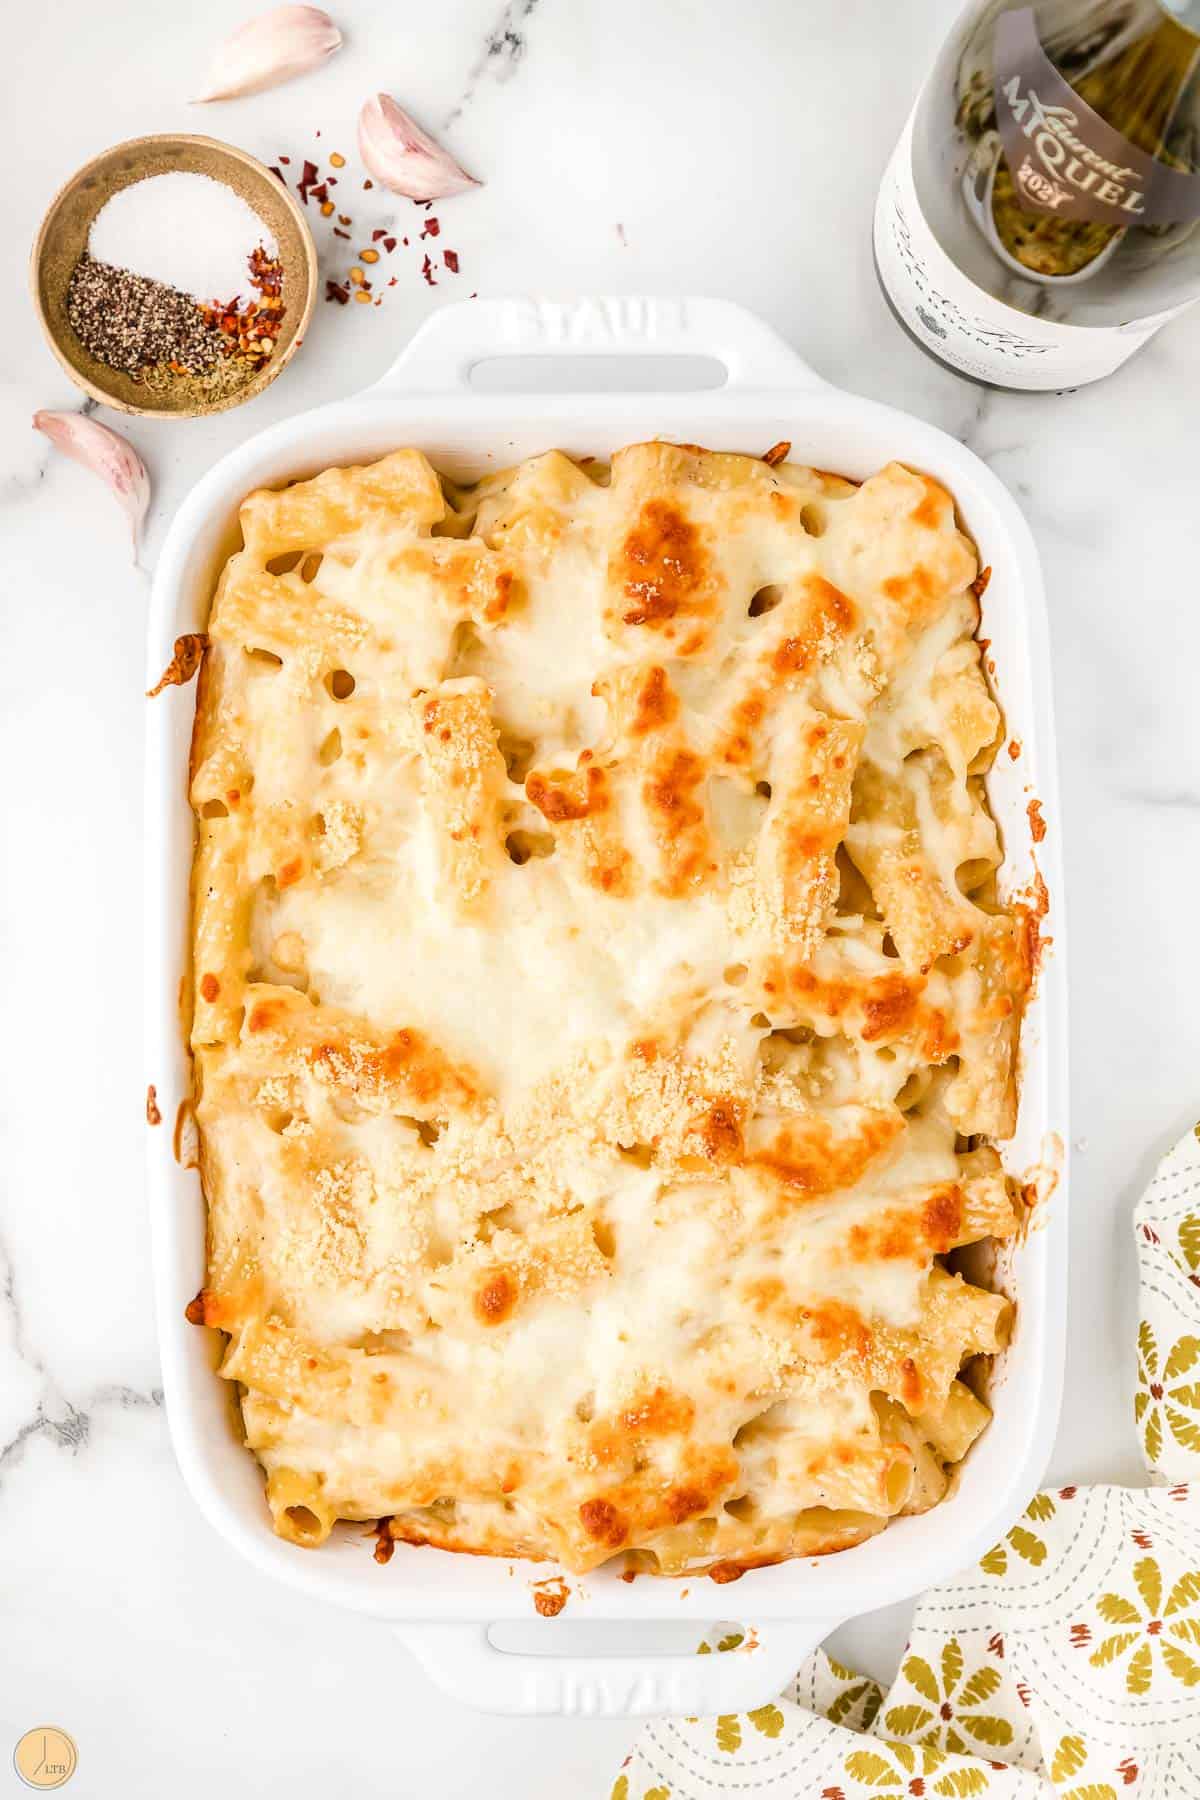 baked cheesy rigatoni noodles in a white dish